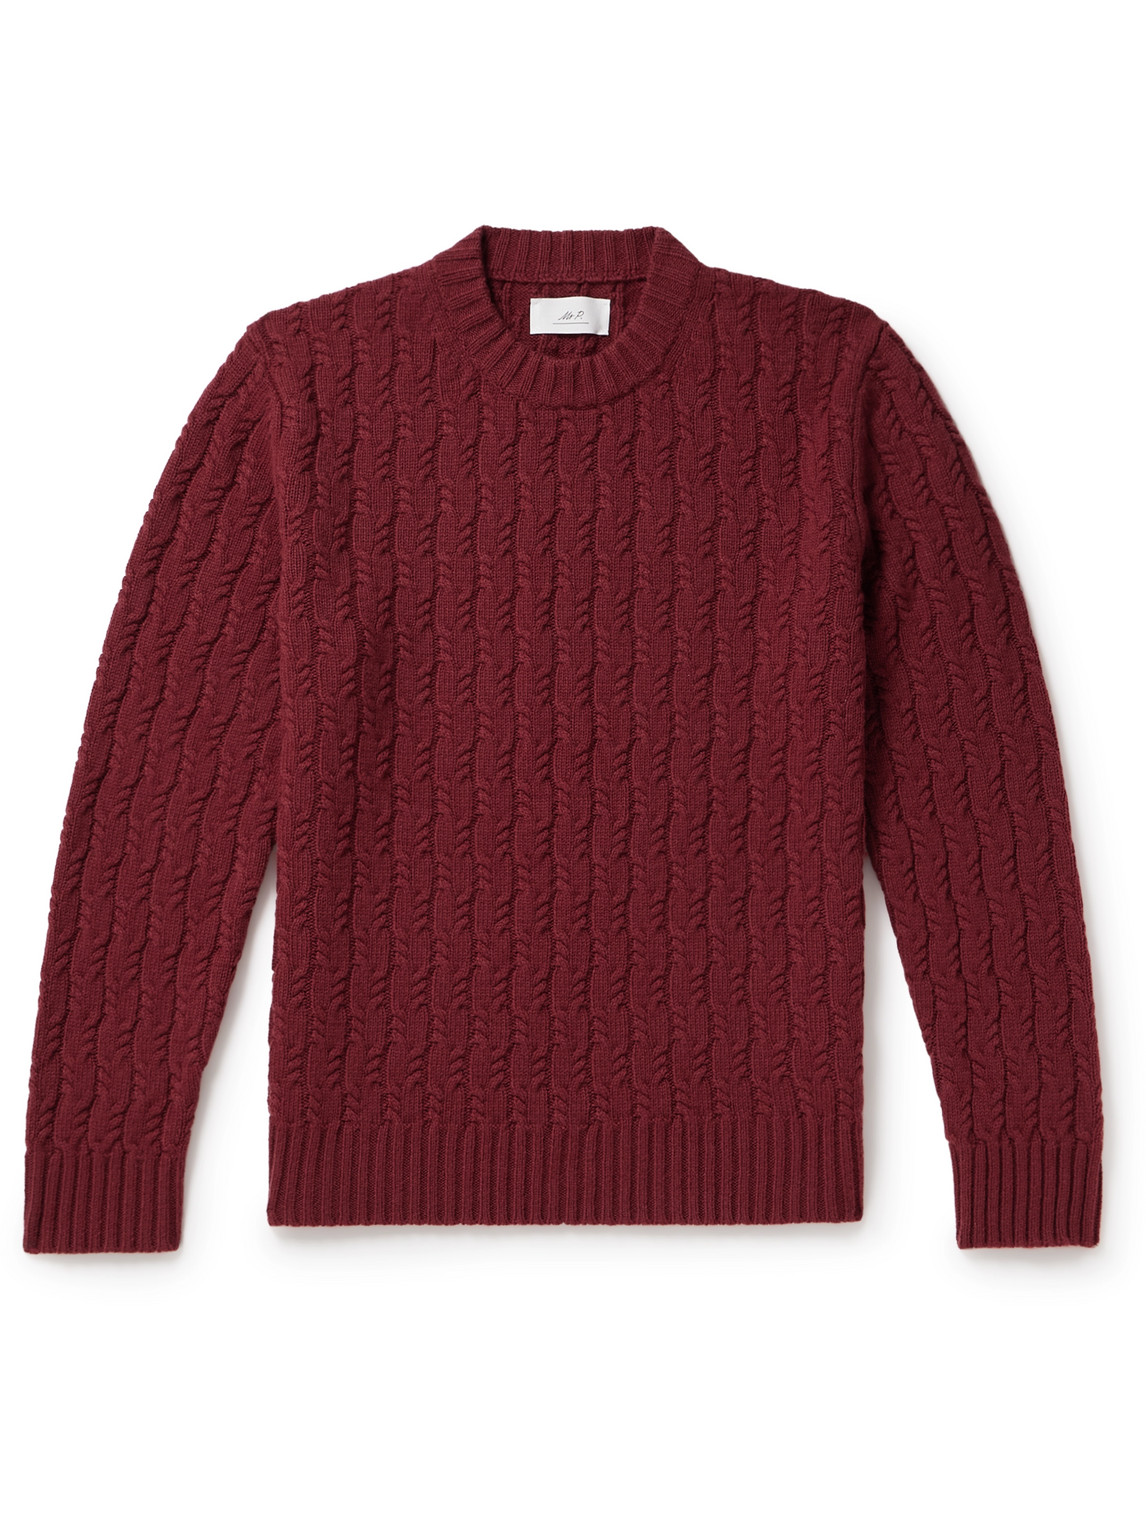 Mr P Cable-knit Wool Sweater In Burgundy